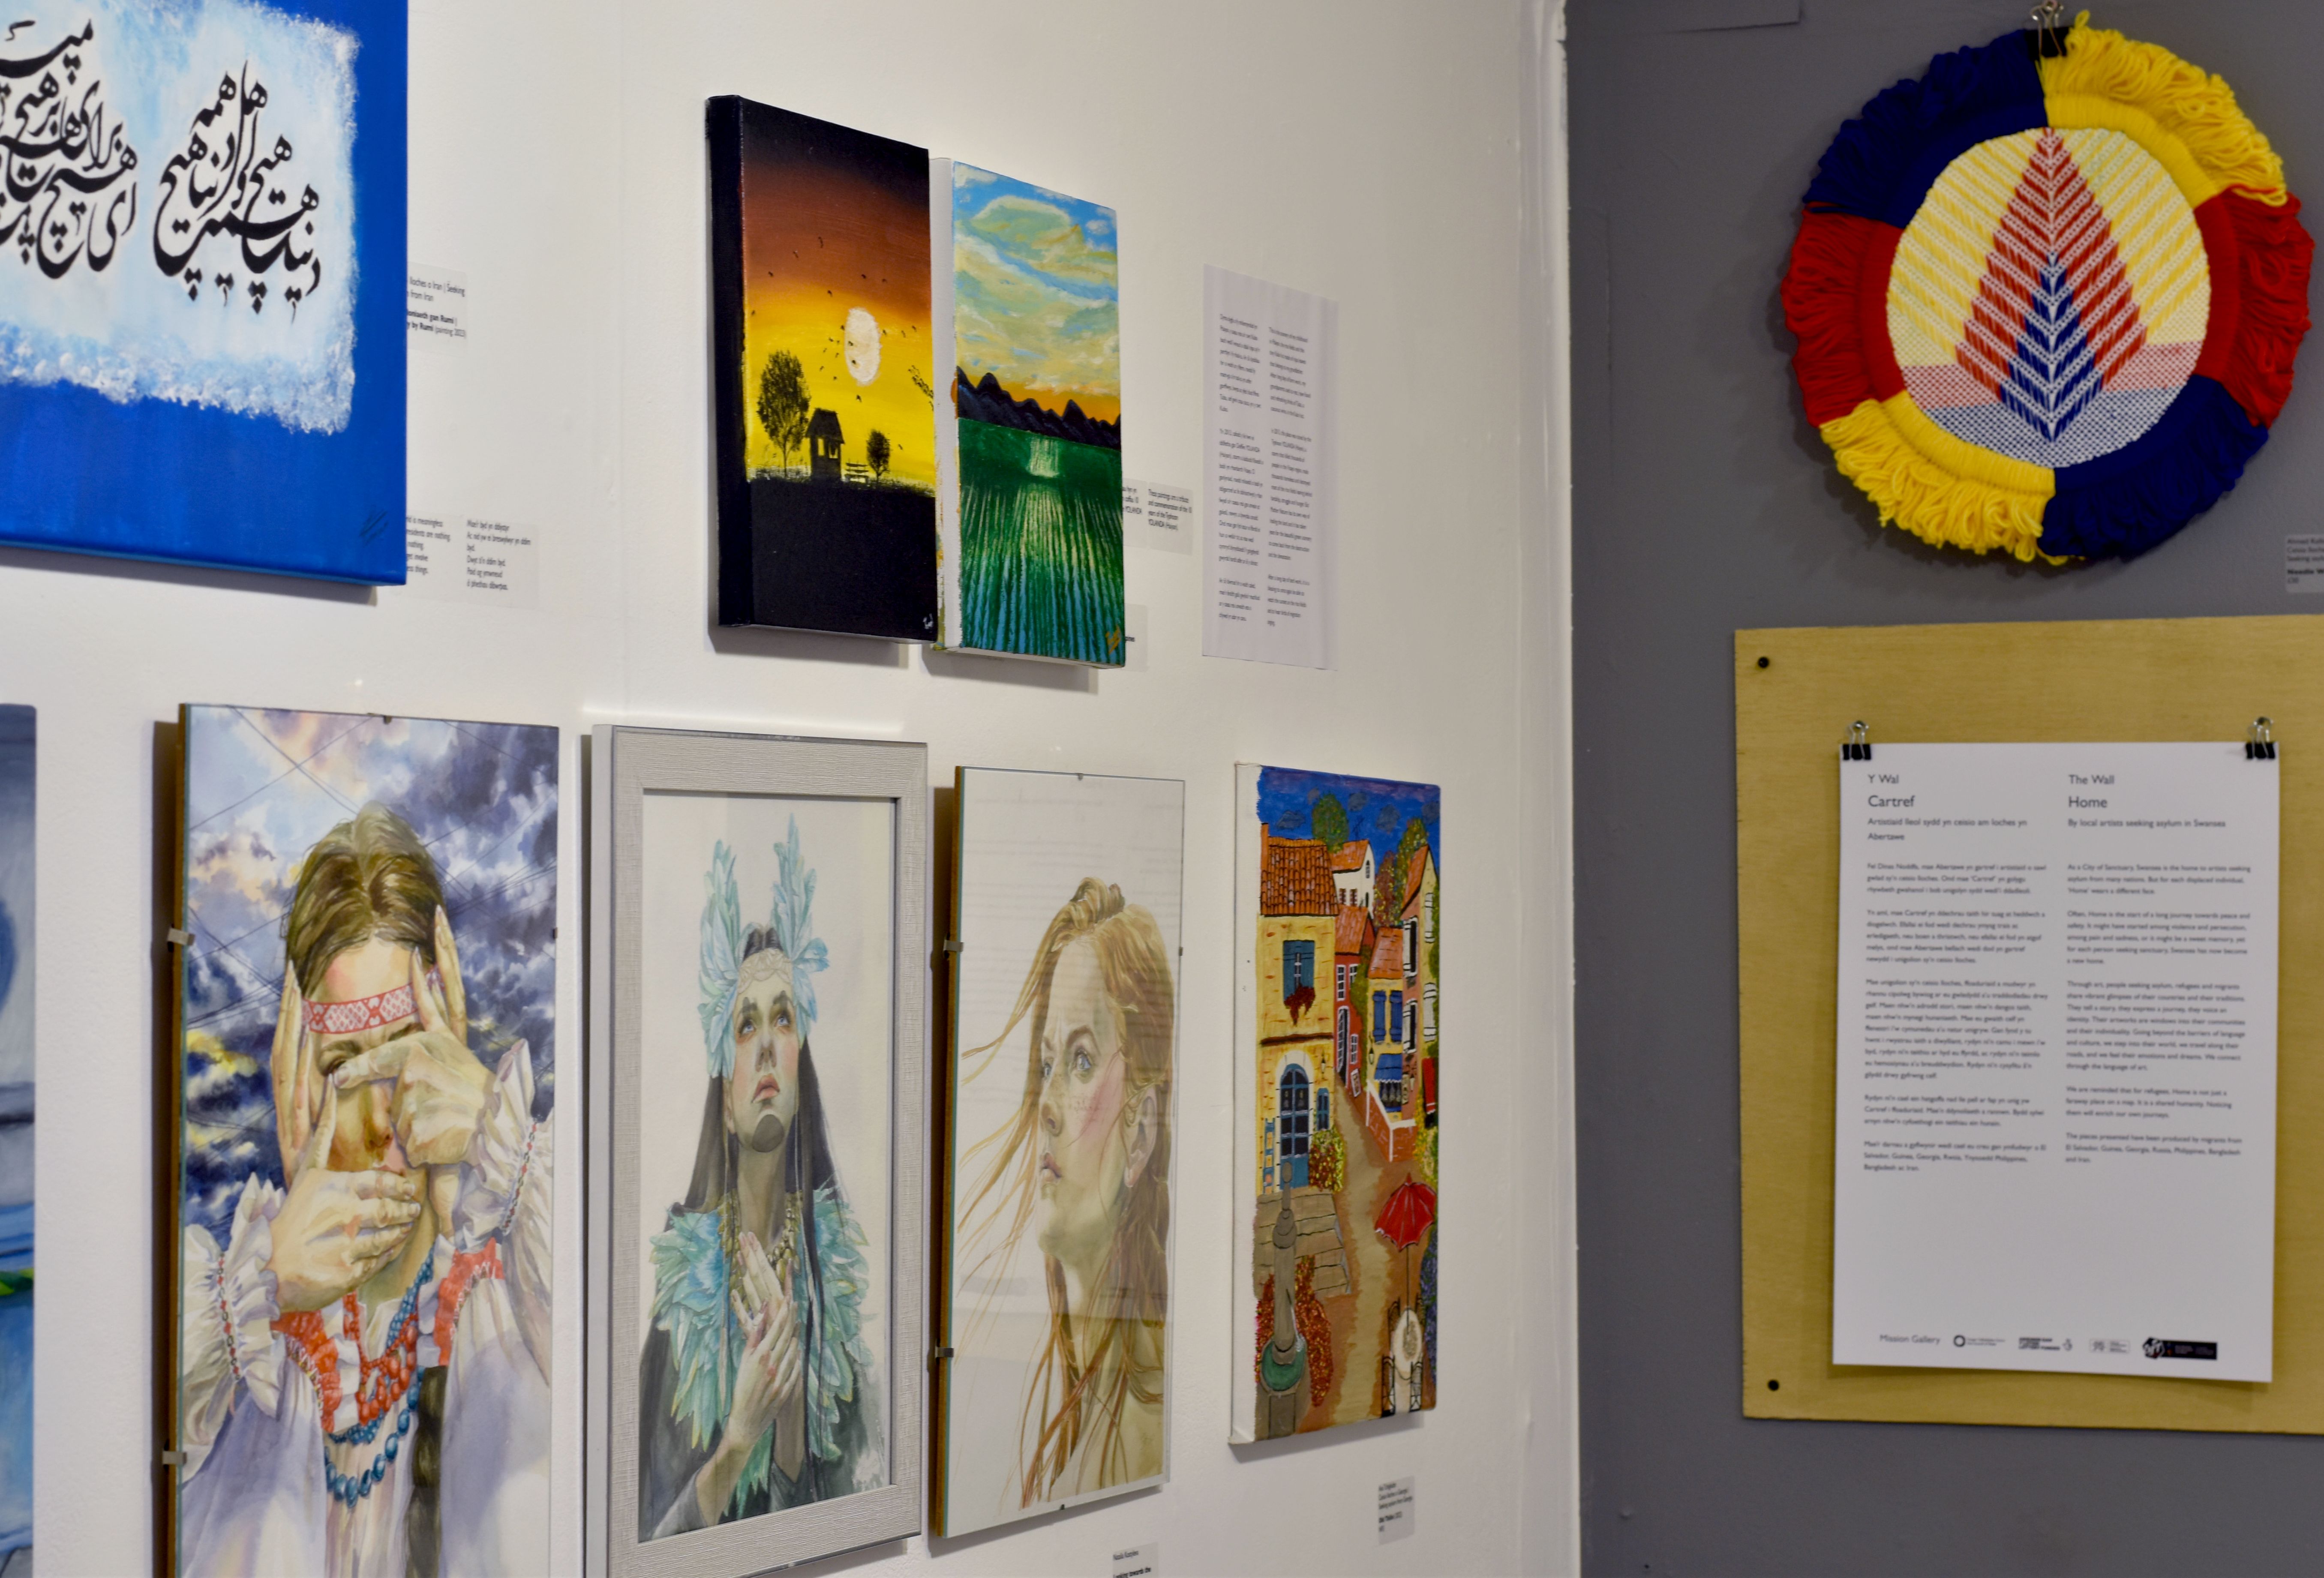 Install images of artworks by local artists seeking asylum in Swansea